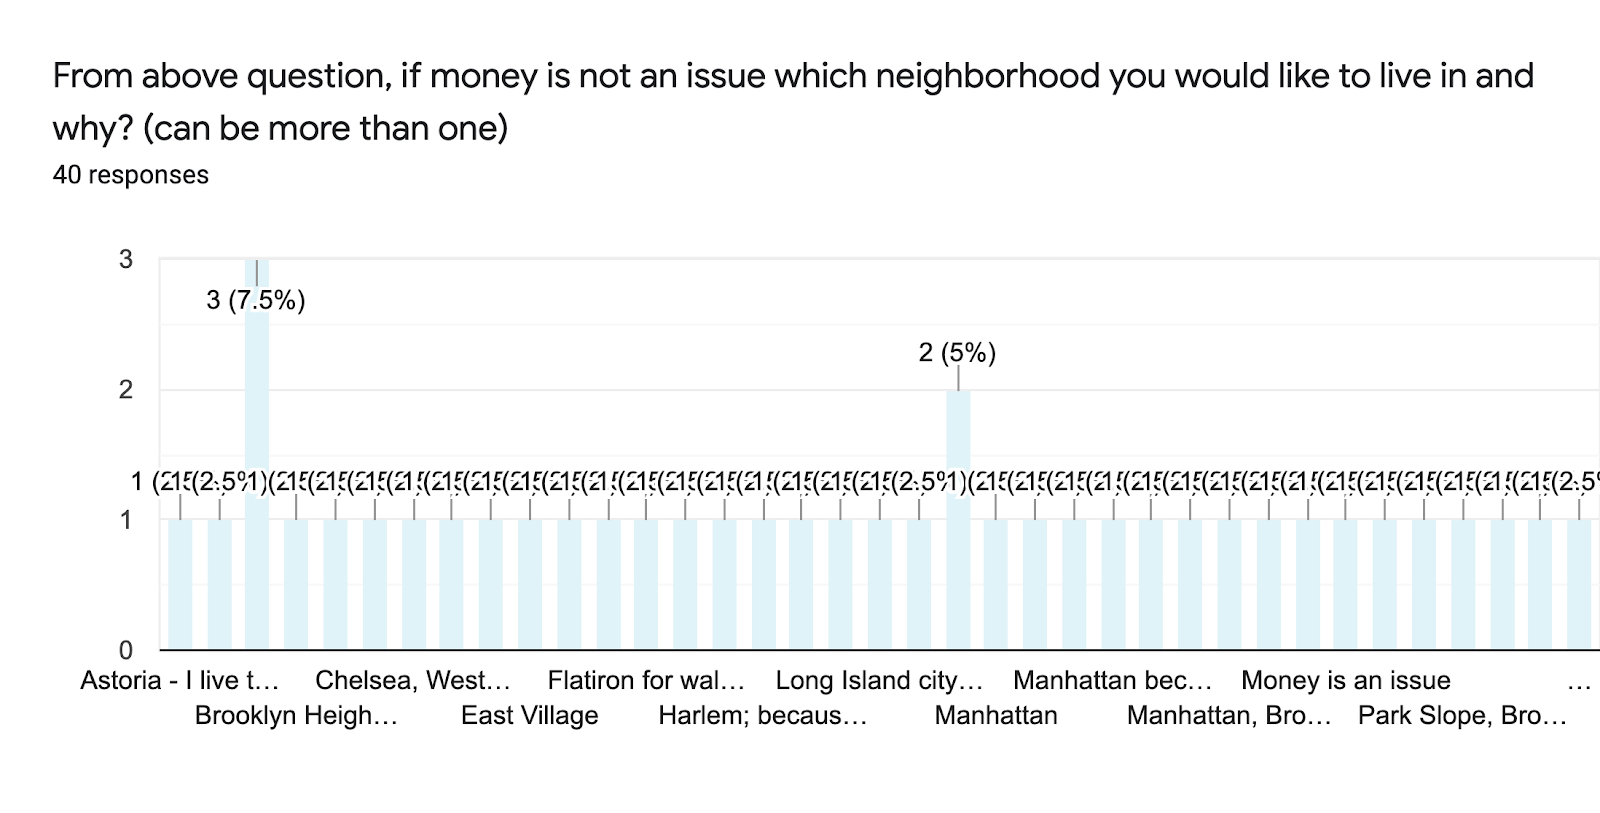 Forms response chart. Question title: From above question, if money is not an issue which neighborhood you would like to live in and why? (can be more than one). Number of responses: 40 responses.